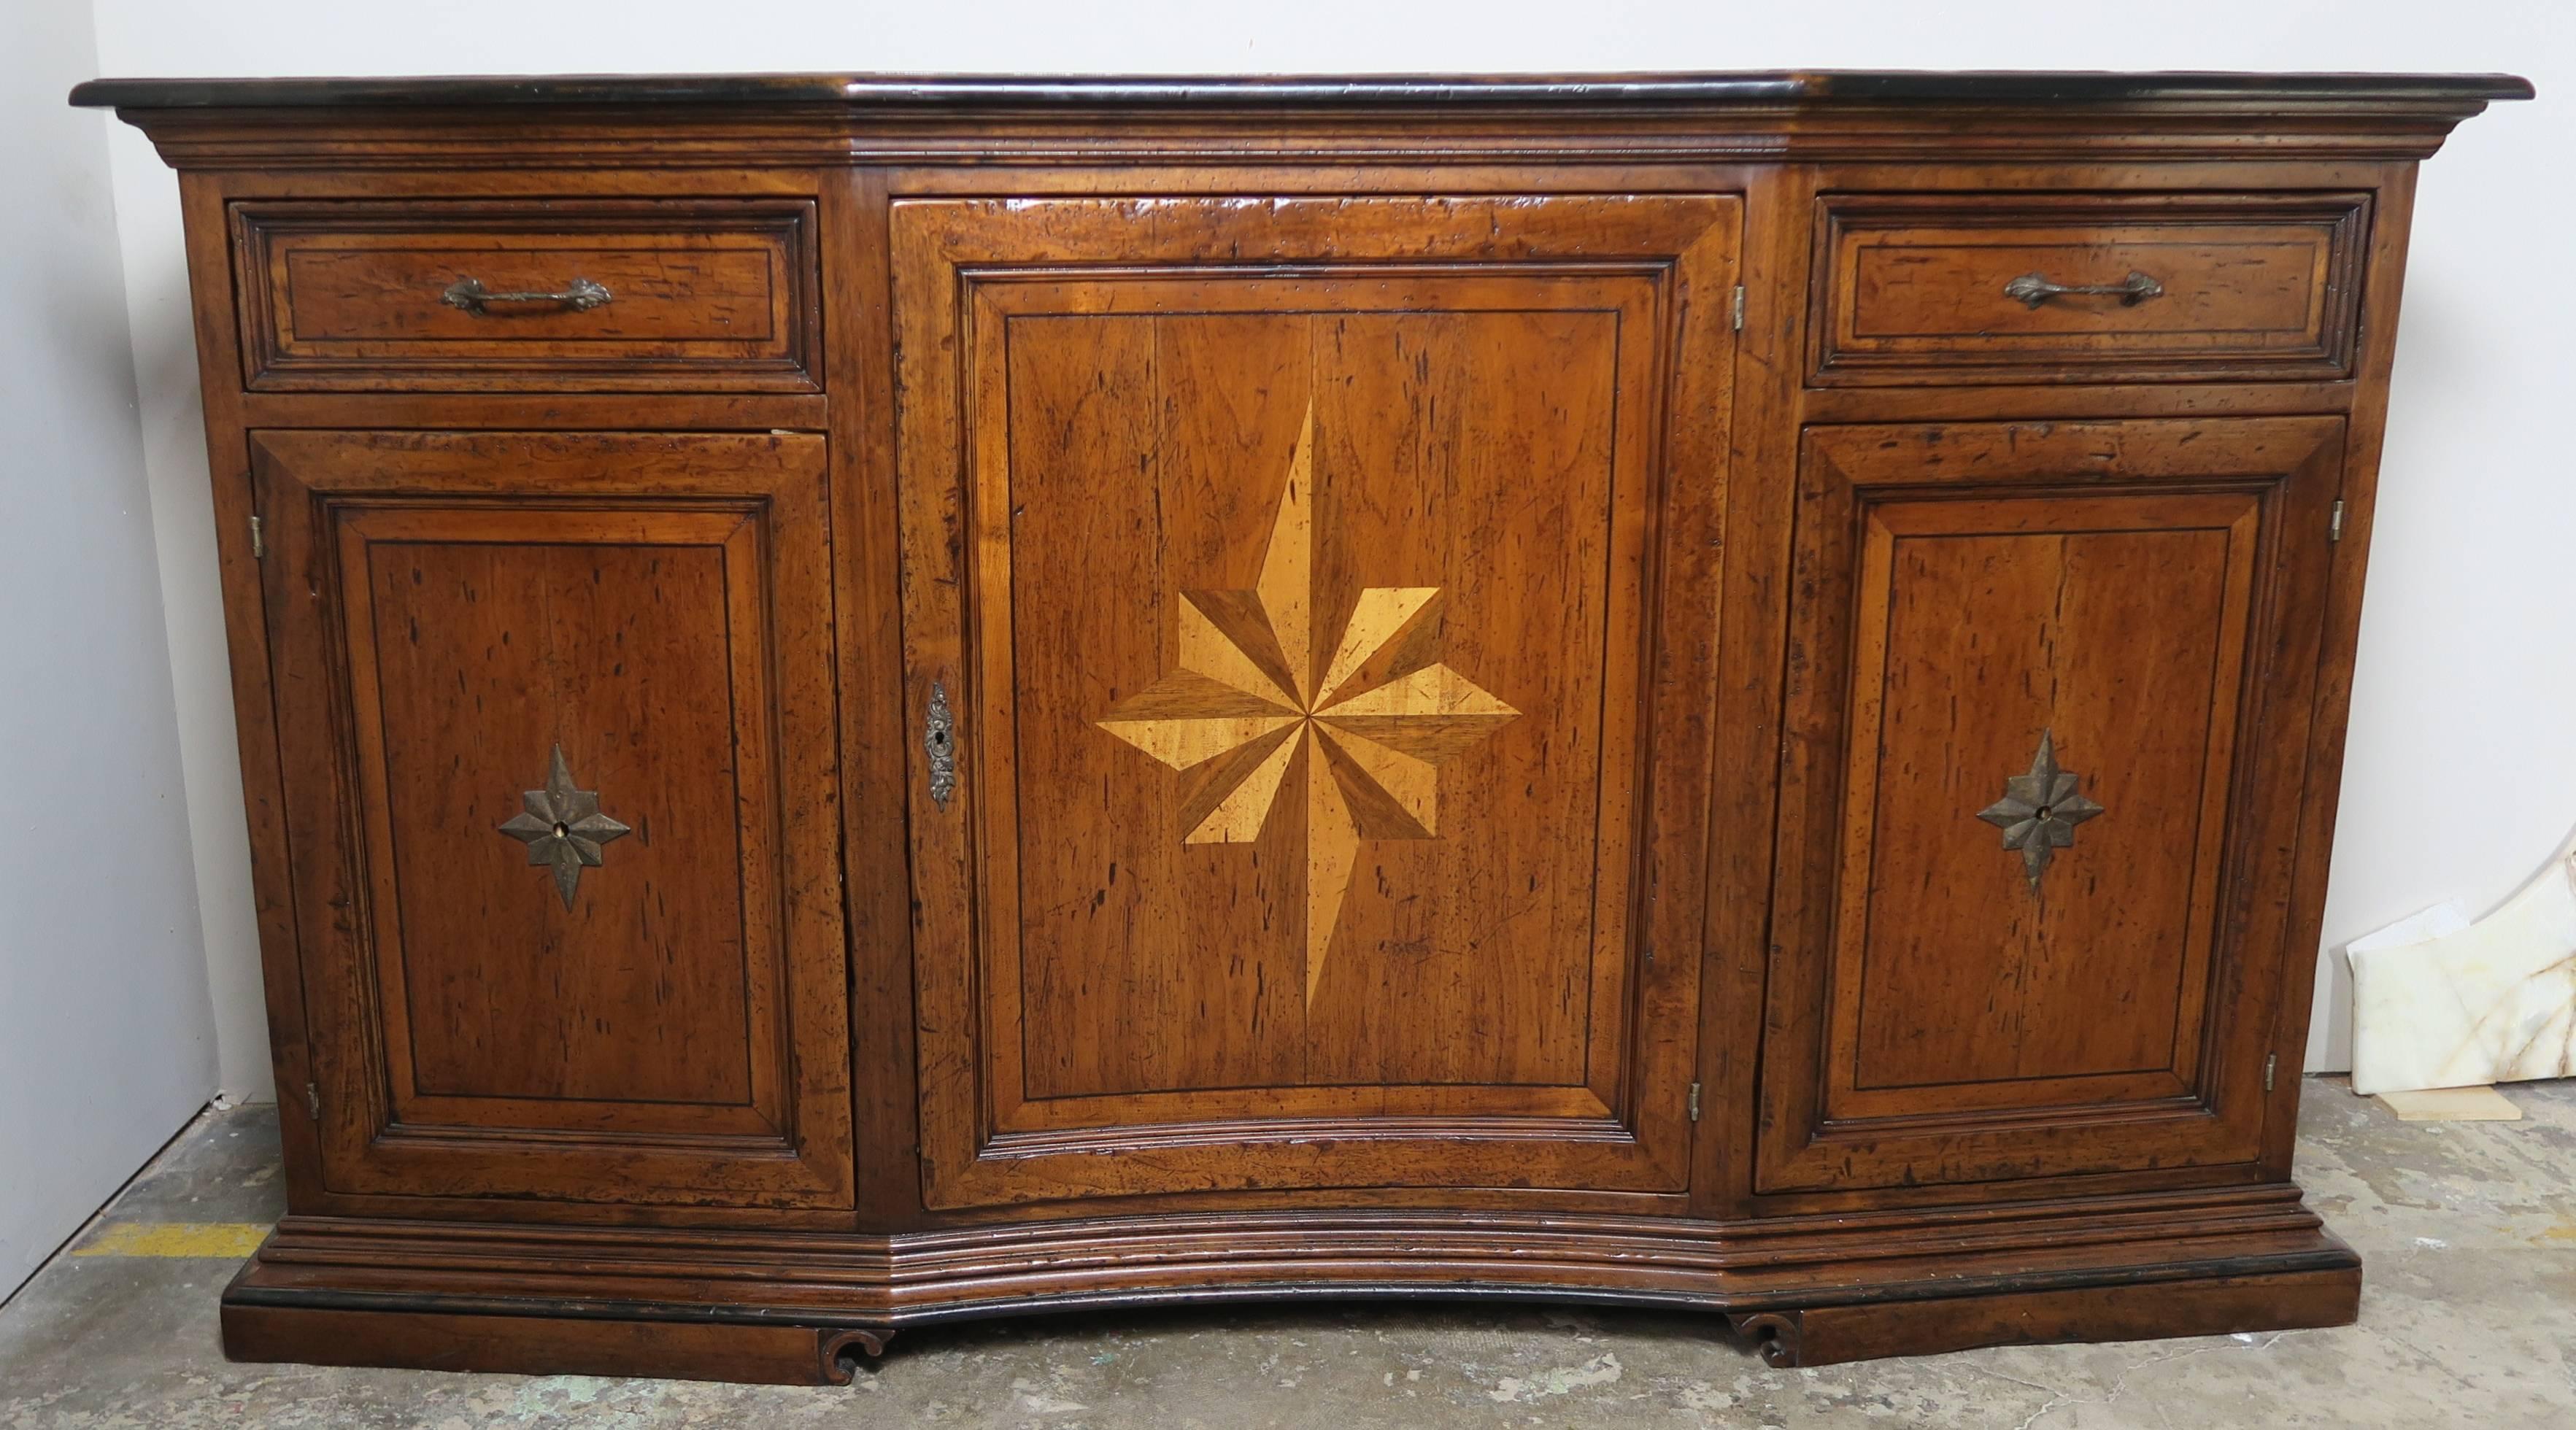 Italian walnut credenza with inlaid maple and mahogany stars on the front door and both sides of the piece. Three doors and two drawers with shelves and plenty of storage. The wood on this piece is rich in color and has developed a beautiful patina